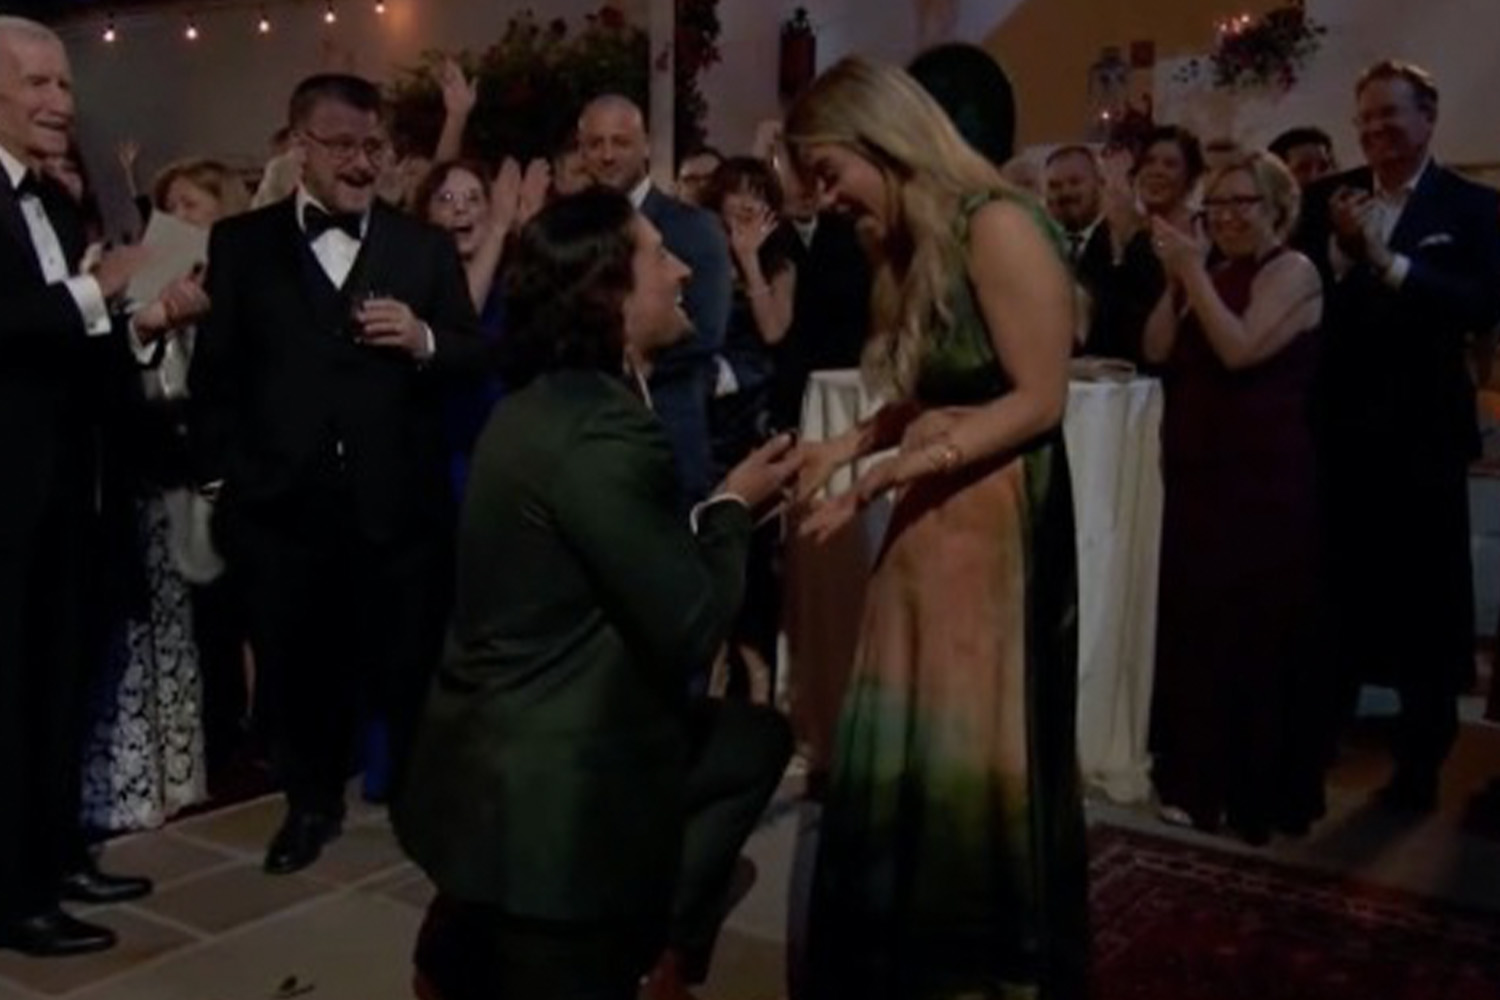 Brayden Bowers proposed during The Golden Wedding